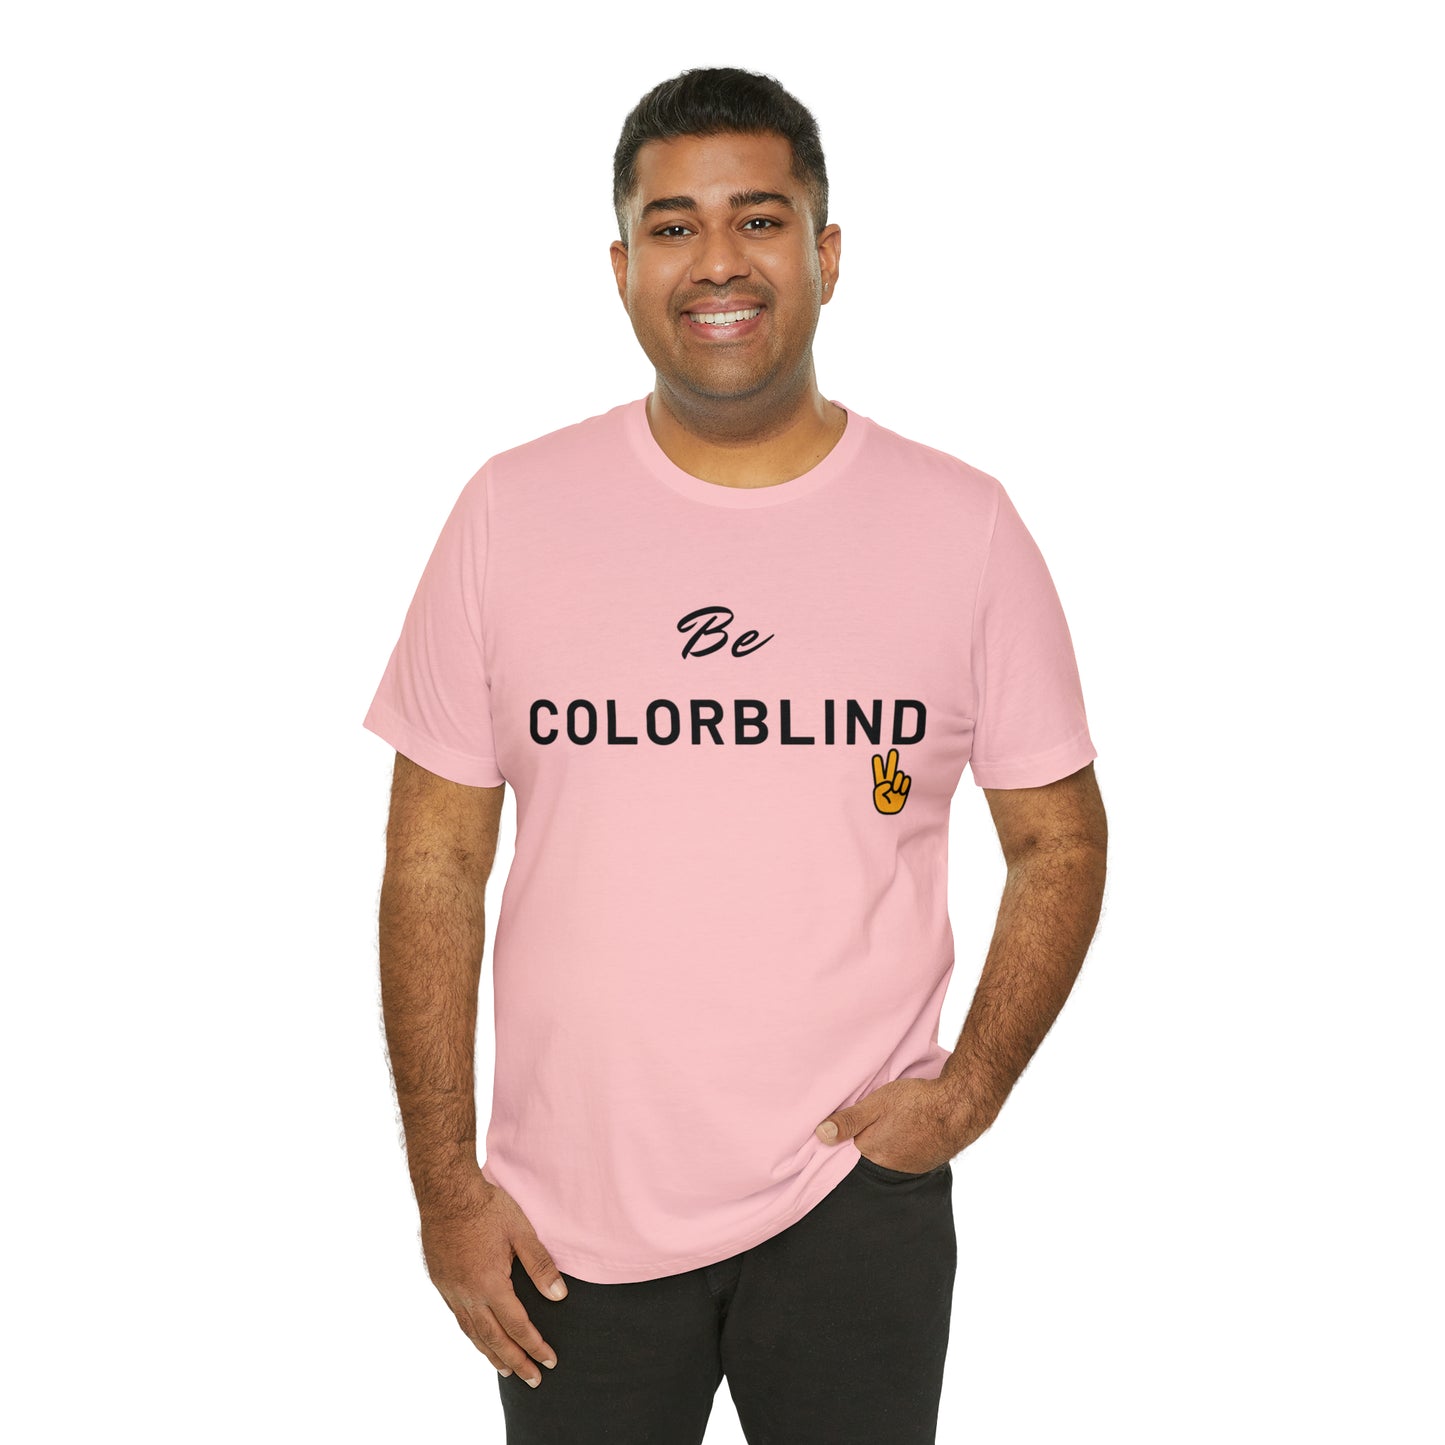 Be Colorblind 3 Unisex Jersey Short Sleeve Tee